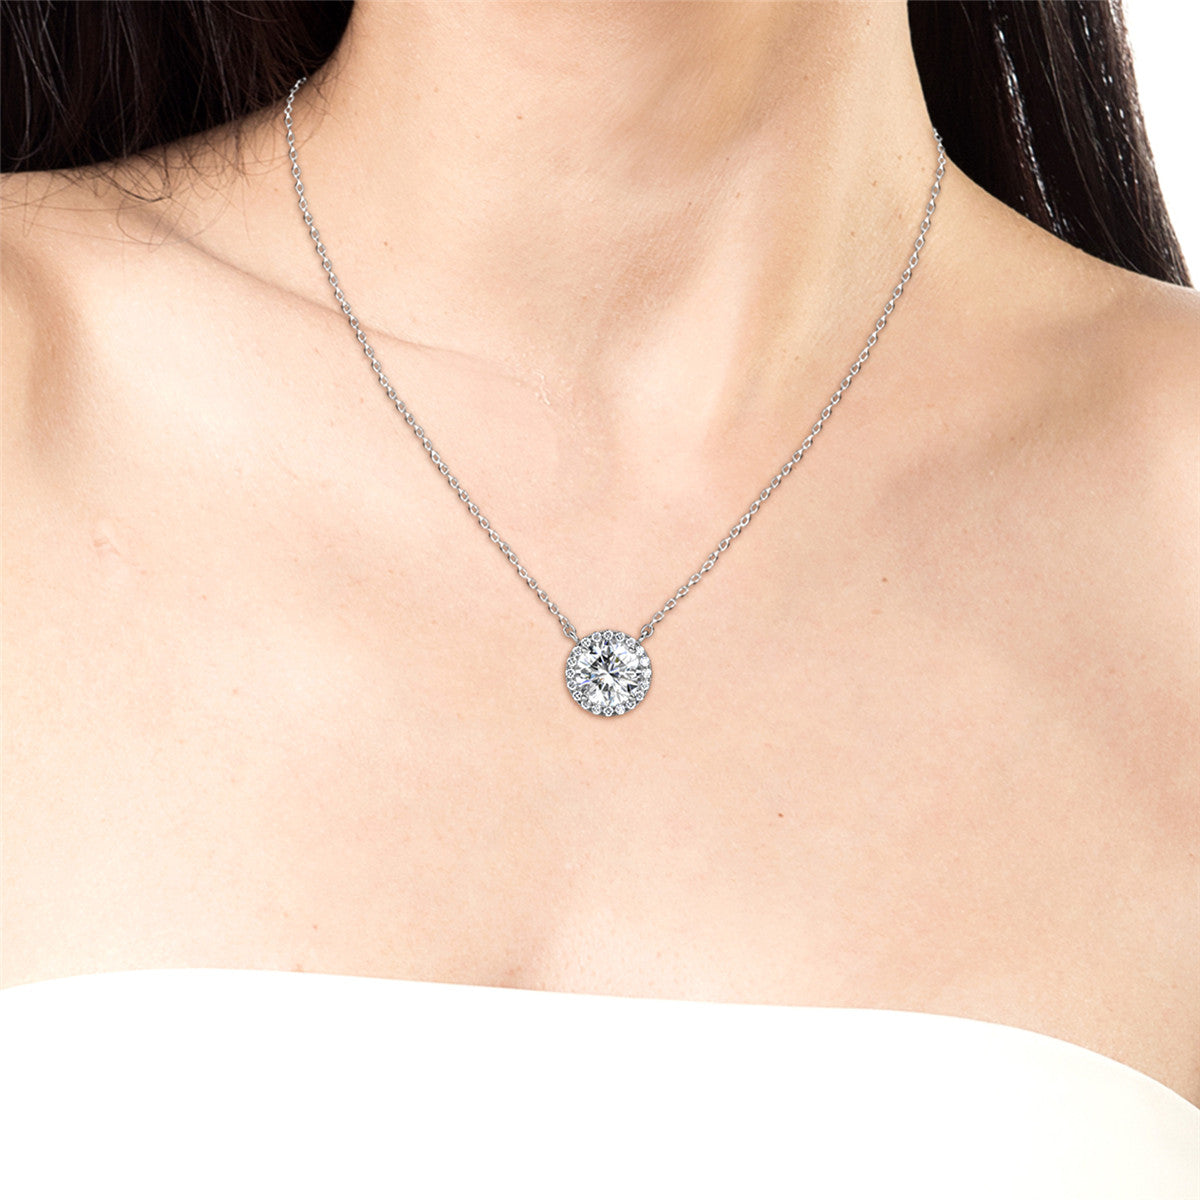 Moissanite by Cate & Chloe Sutton Sterling Silver Necklace with Moissanite and 5A Cubic Zirconia Crystals